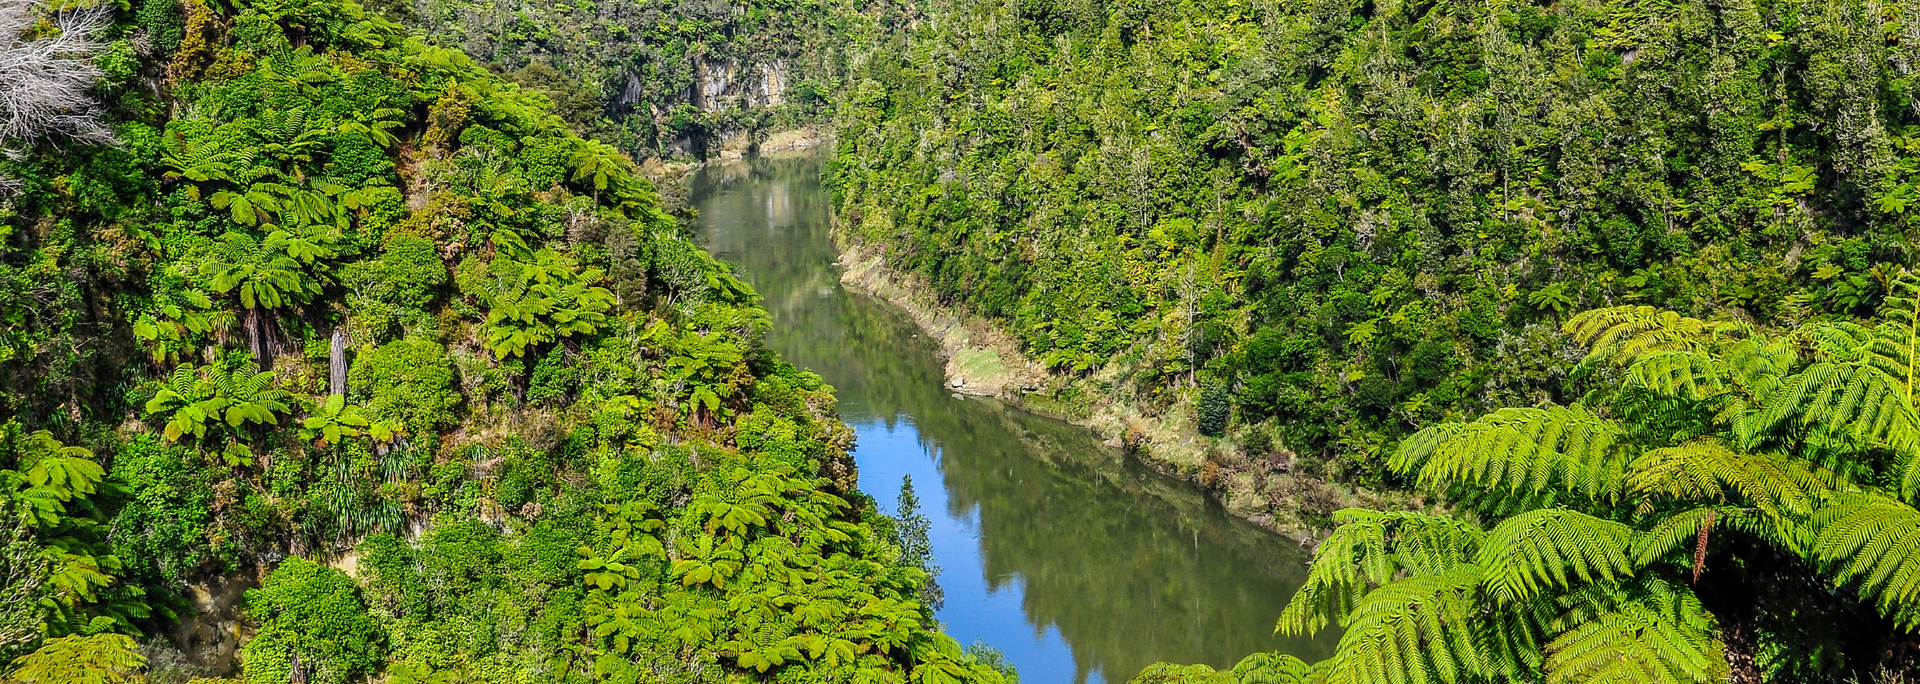 picture of the Whanganui River, New Zealand